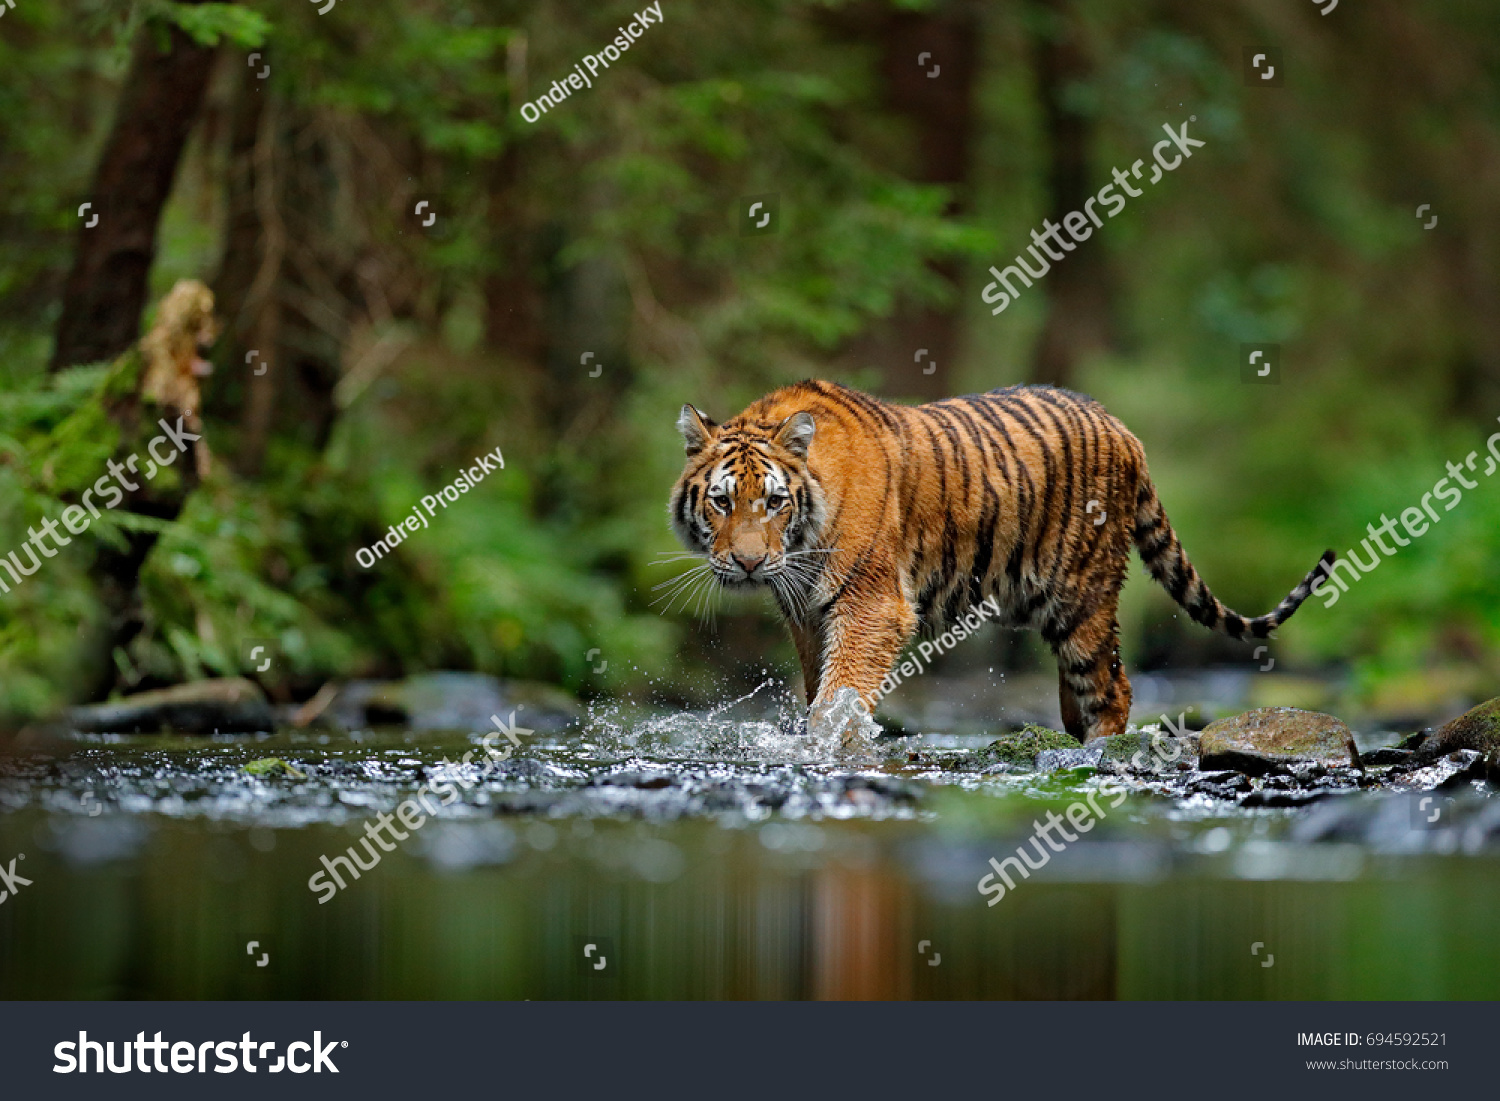 Amur tiger walking in the water. Dangerous animal, taiga, Russia. Animal in green forest stream. Grey stone, river droplet. Wild cat in nature habitat. #694592521